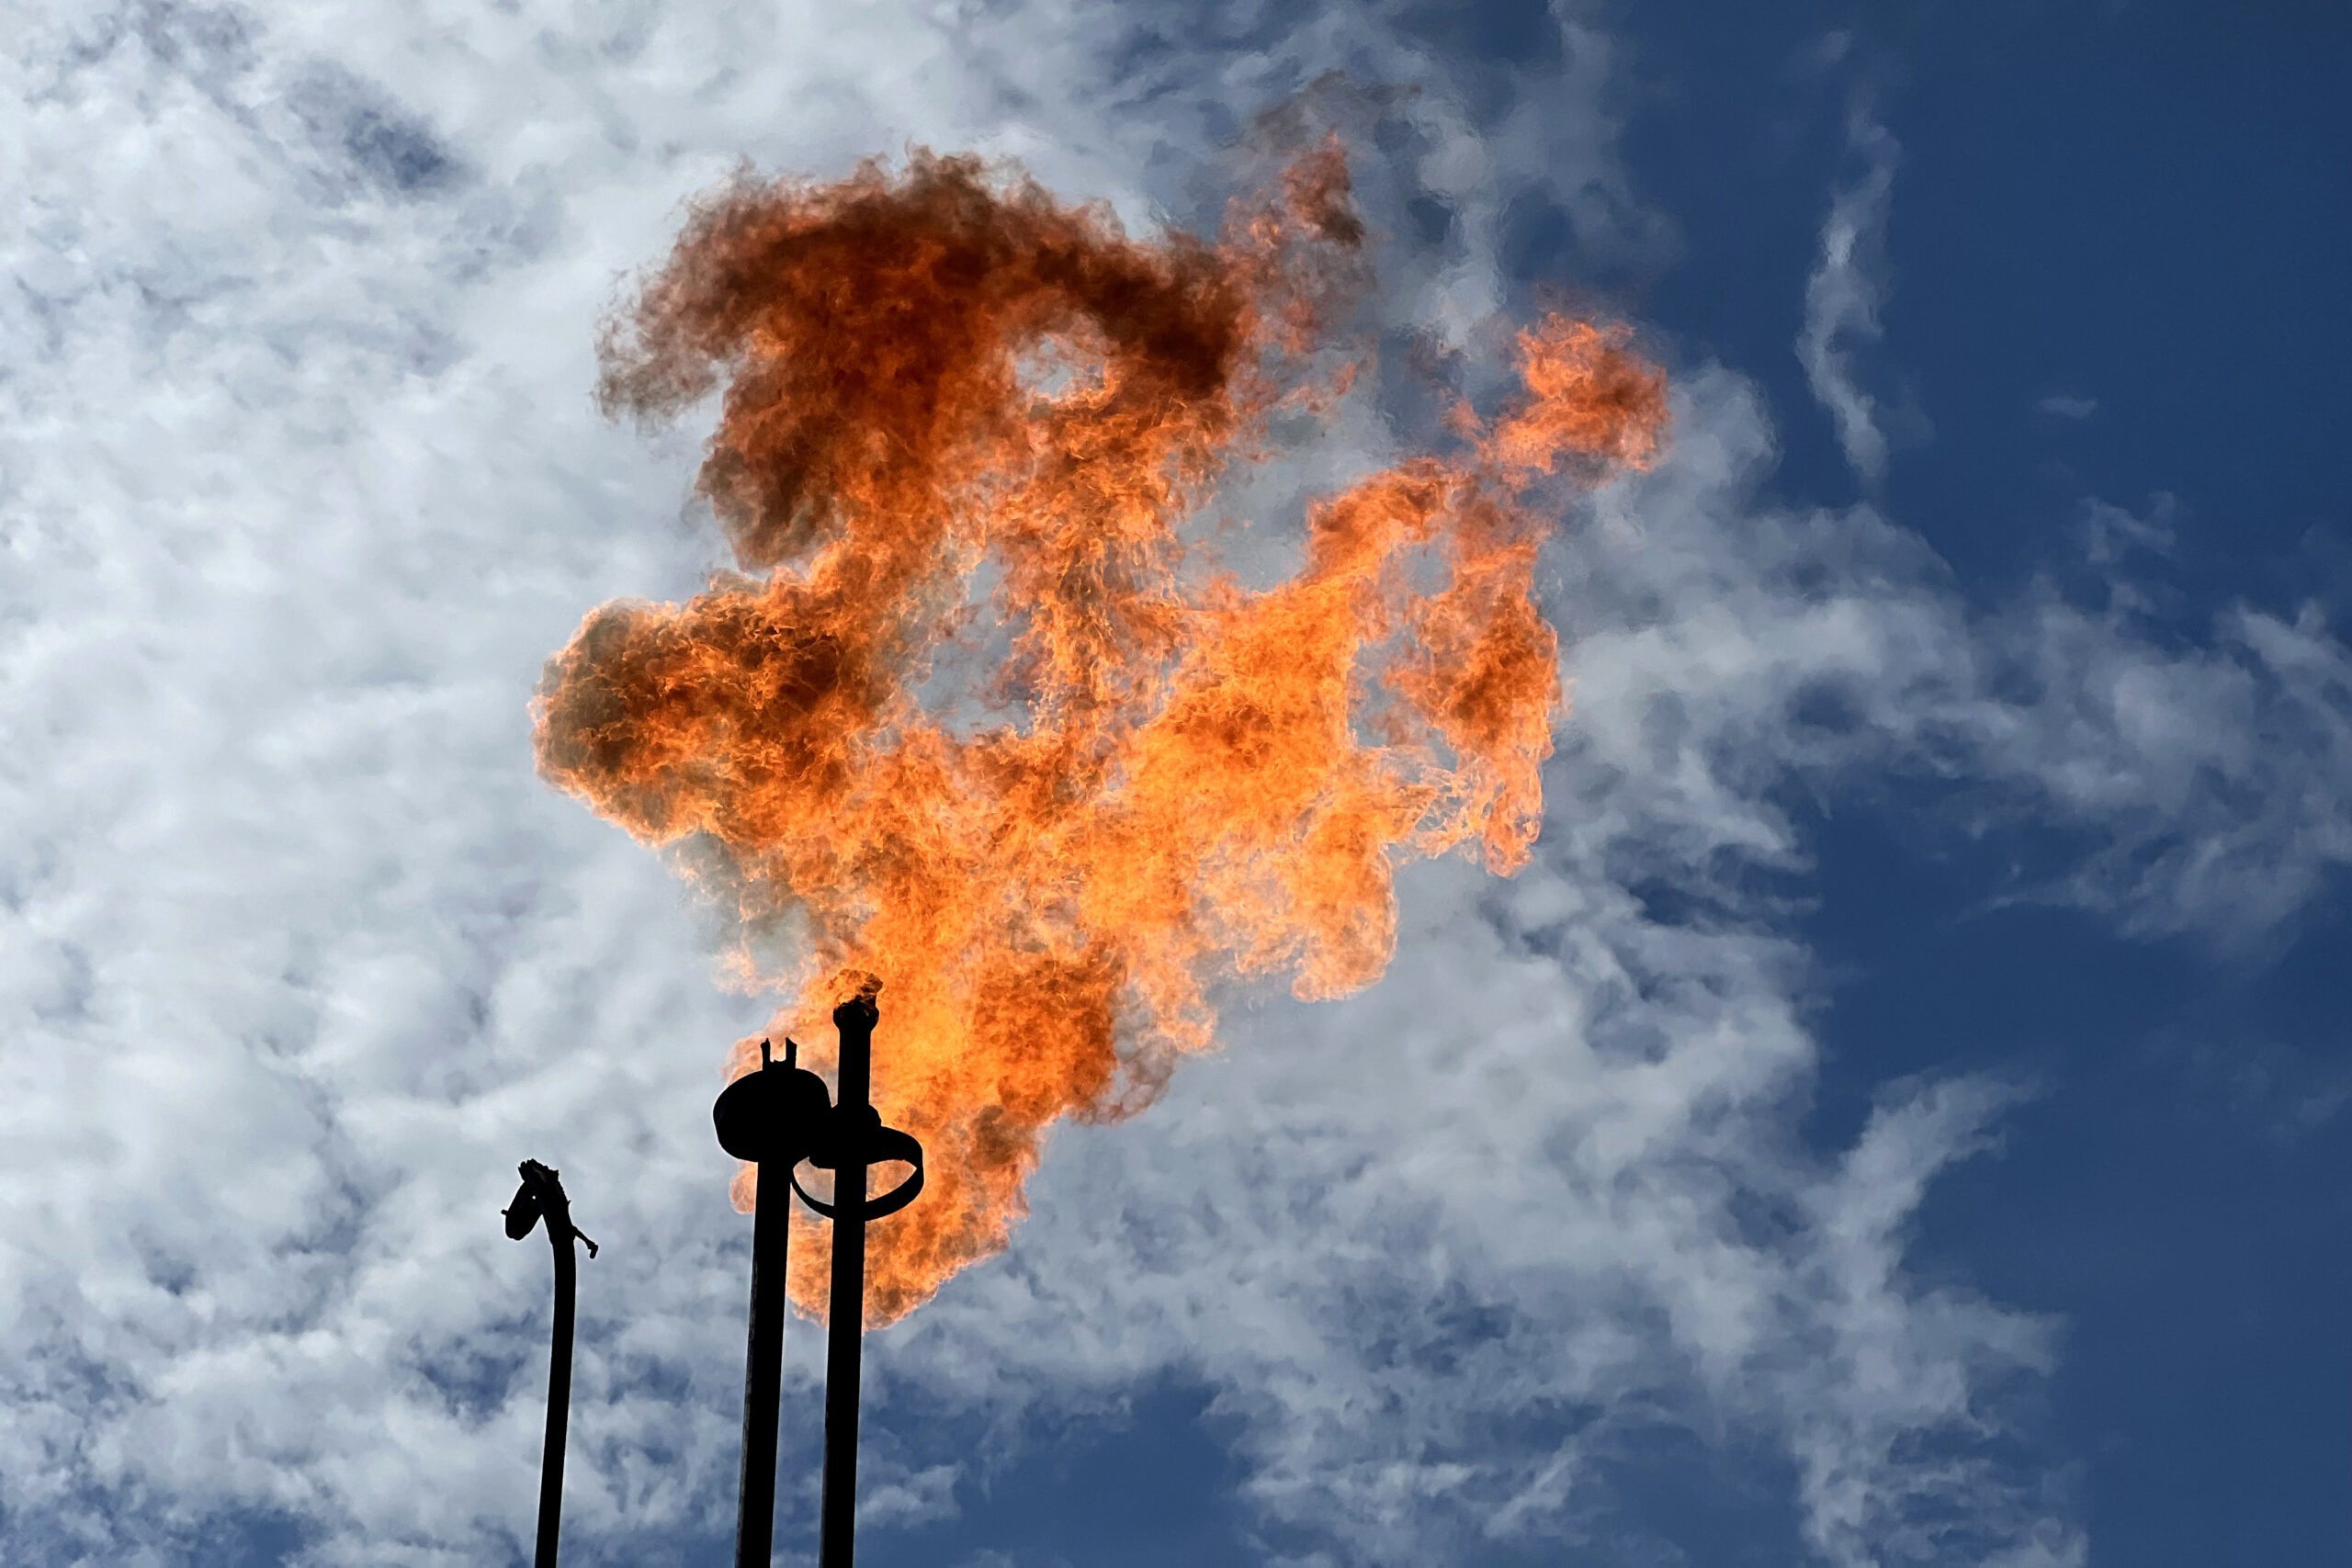 A gas flare at an oil well site in the Ecuadorian Amazon region. Flaring has been linked to adverse health outcomes like increased risk for preterm births and asthma. More than 440 flares dot the landscape of the Ecuadorian Amazon rainforest. Credit: Katie Surma/Inside Climate News